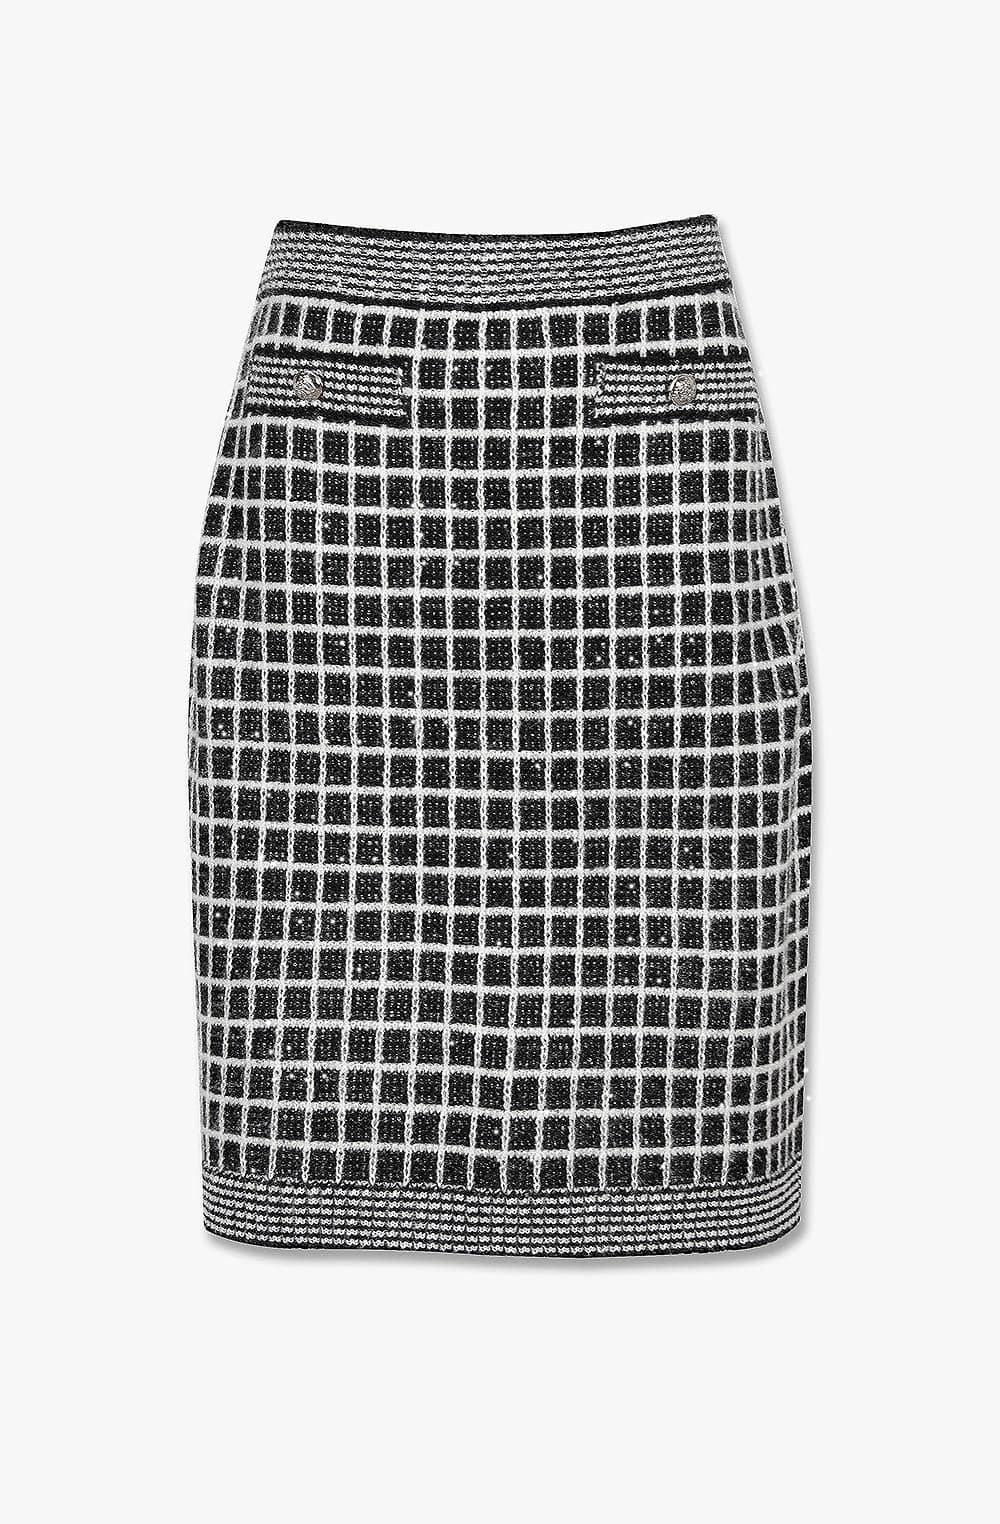 HIGH QUALITY LINE - BARRIE SEQUIN TWEED KNIT SKIRT (BLACK)